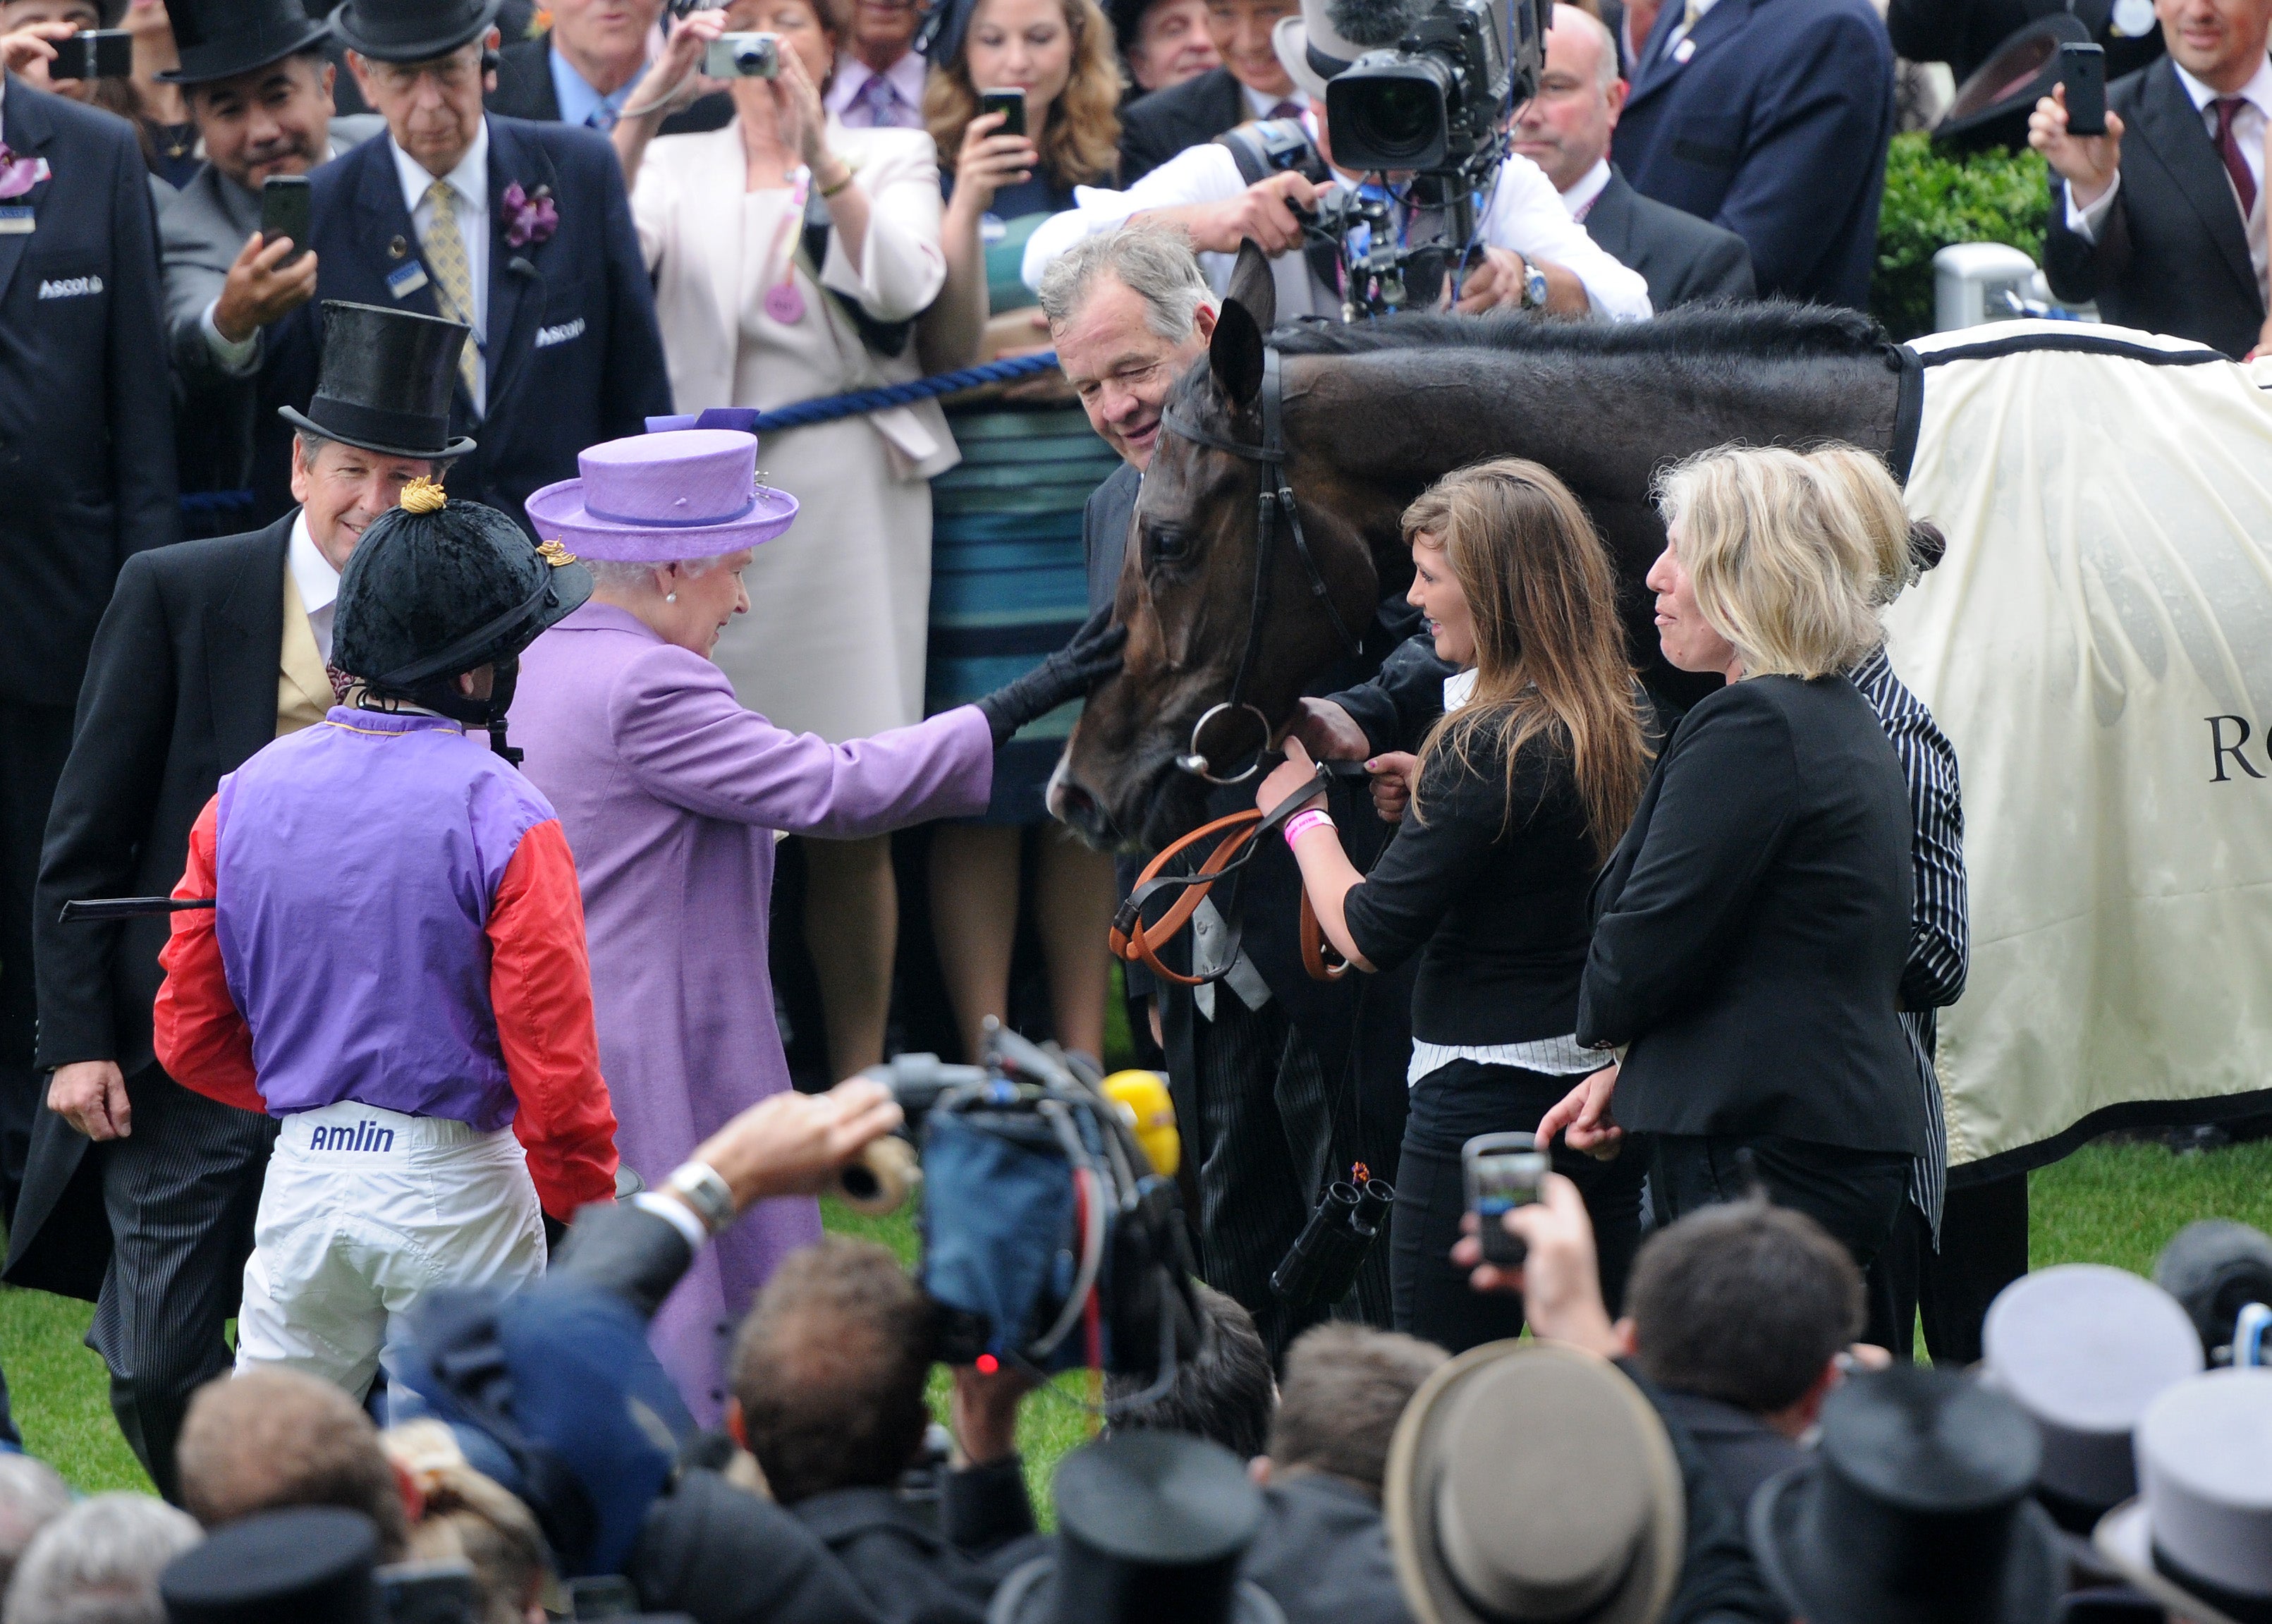 The Queen congratulates her horse, Estimate, following a Gold Cup win on Ladies’ Day at Royal Ascot in 2013